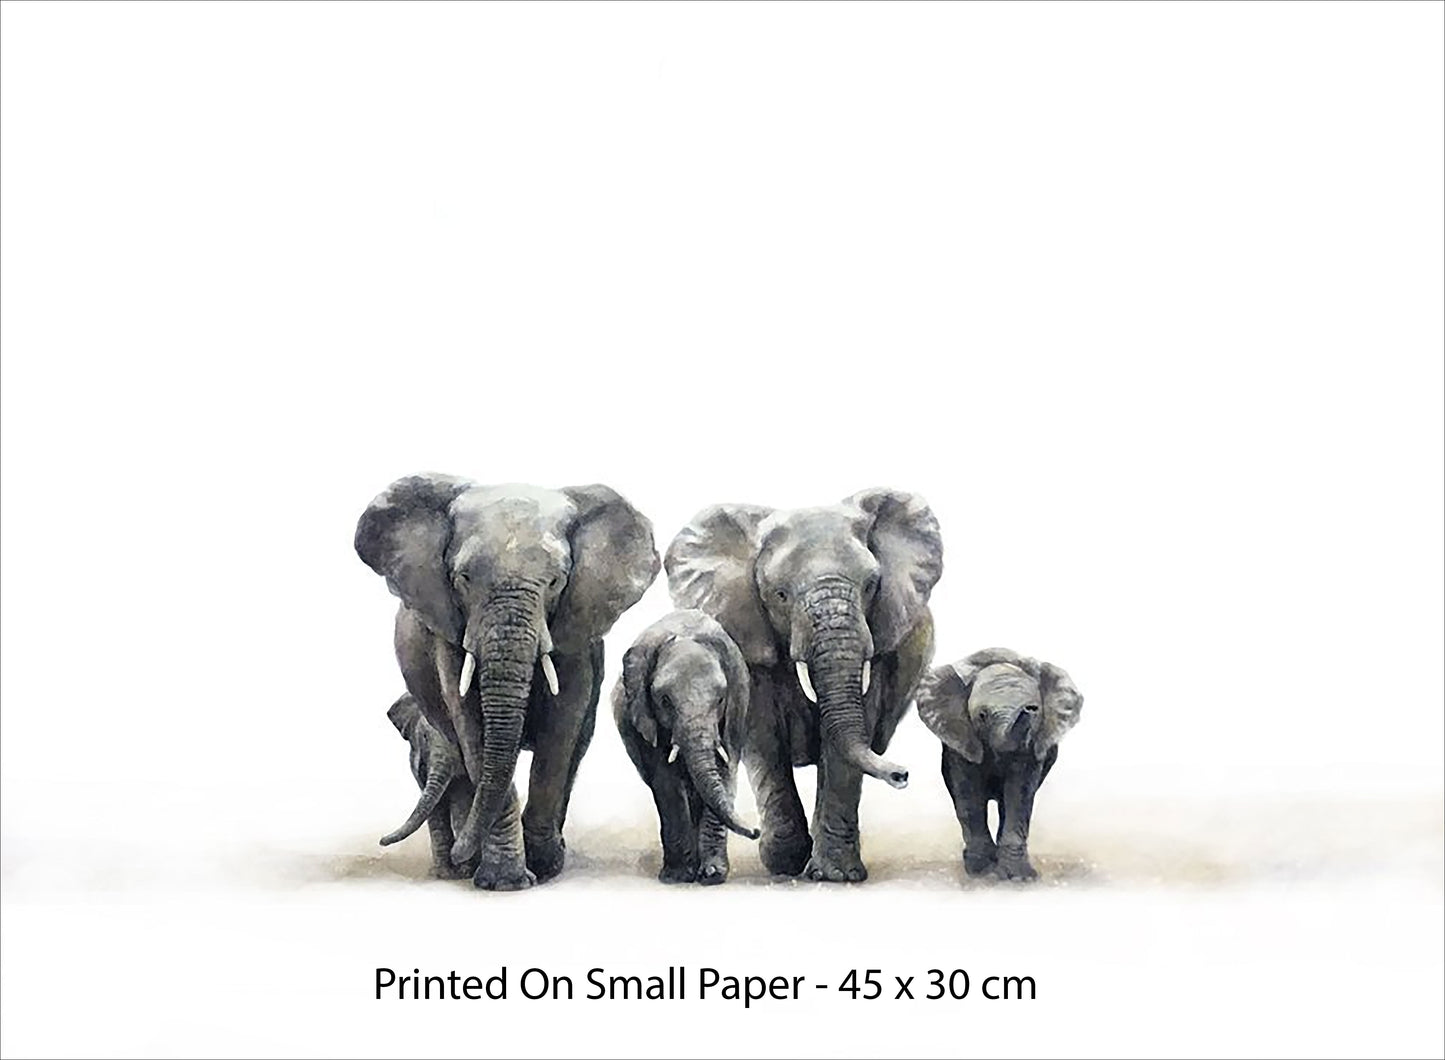 Elephants Motoring - Limited Edition of Water color Prints